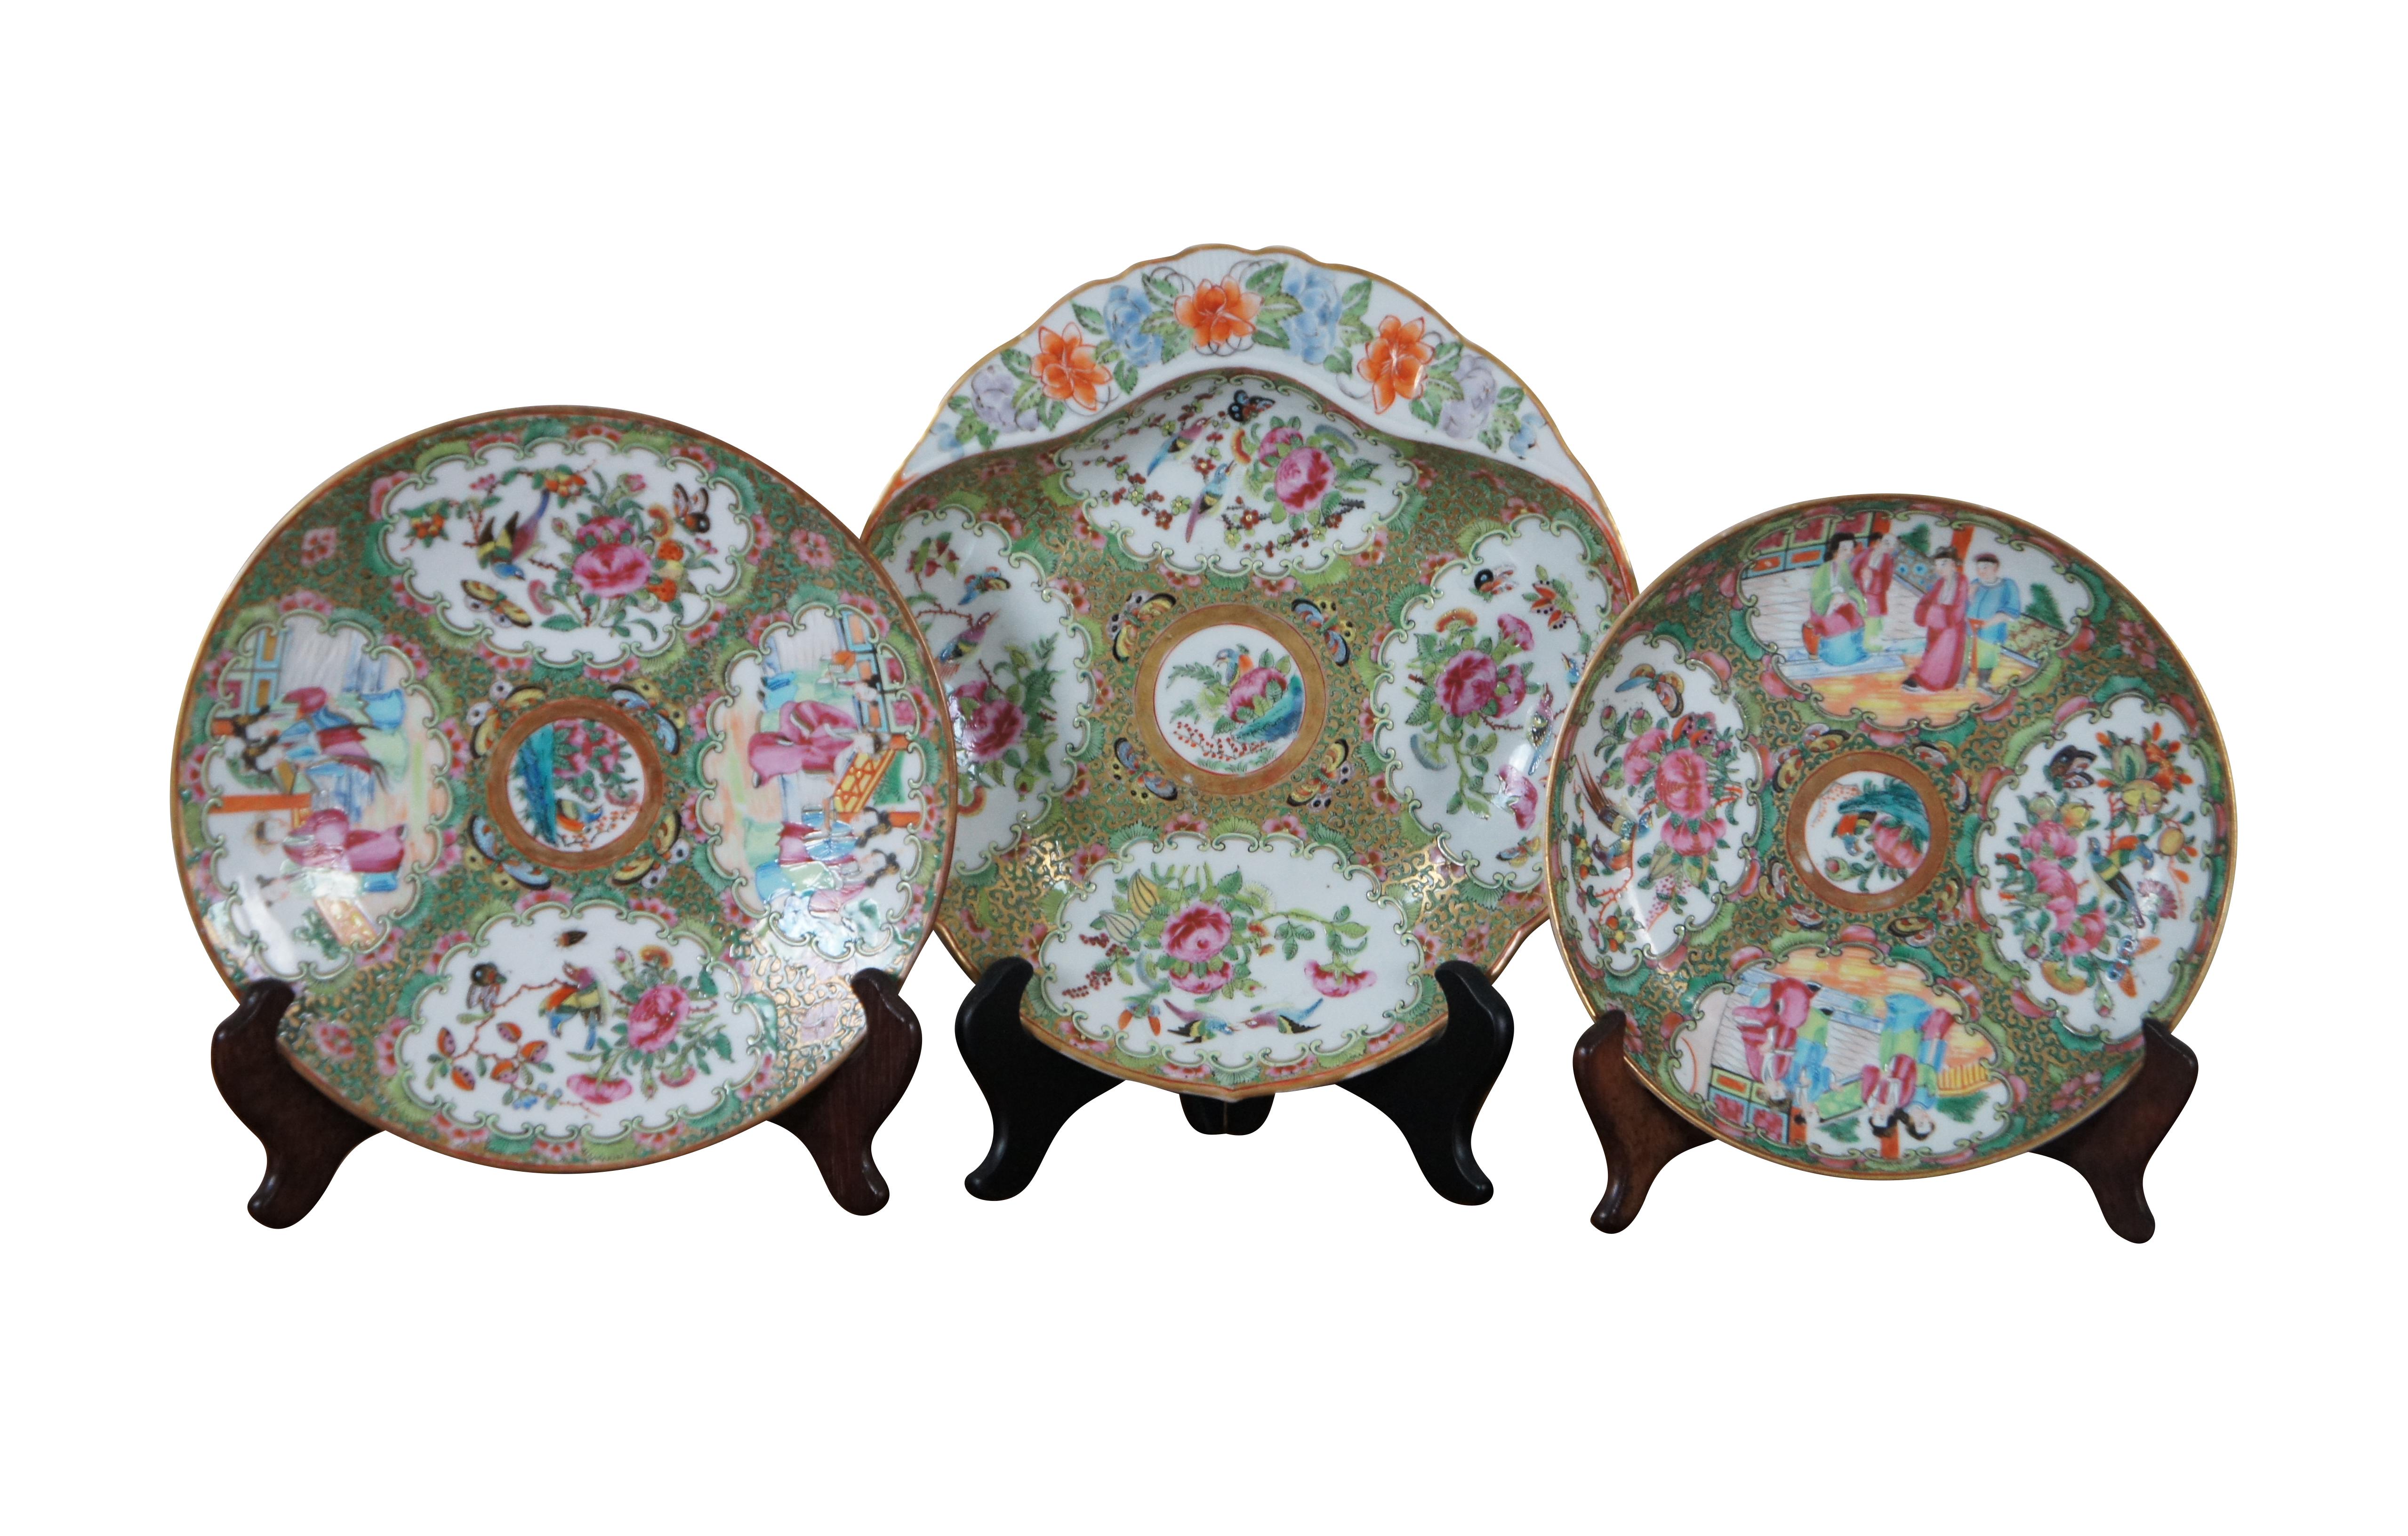 Antique 32pc 19th Century Chinese Export Mandarin Famille Rose Porcelain China  In Good Condition For Sale In Dayton, OH